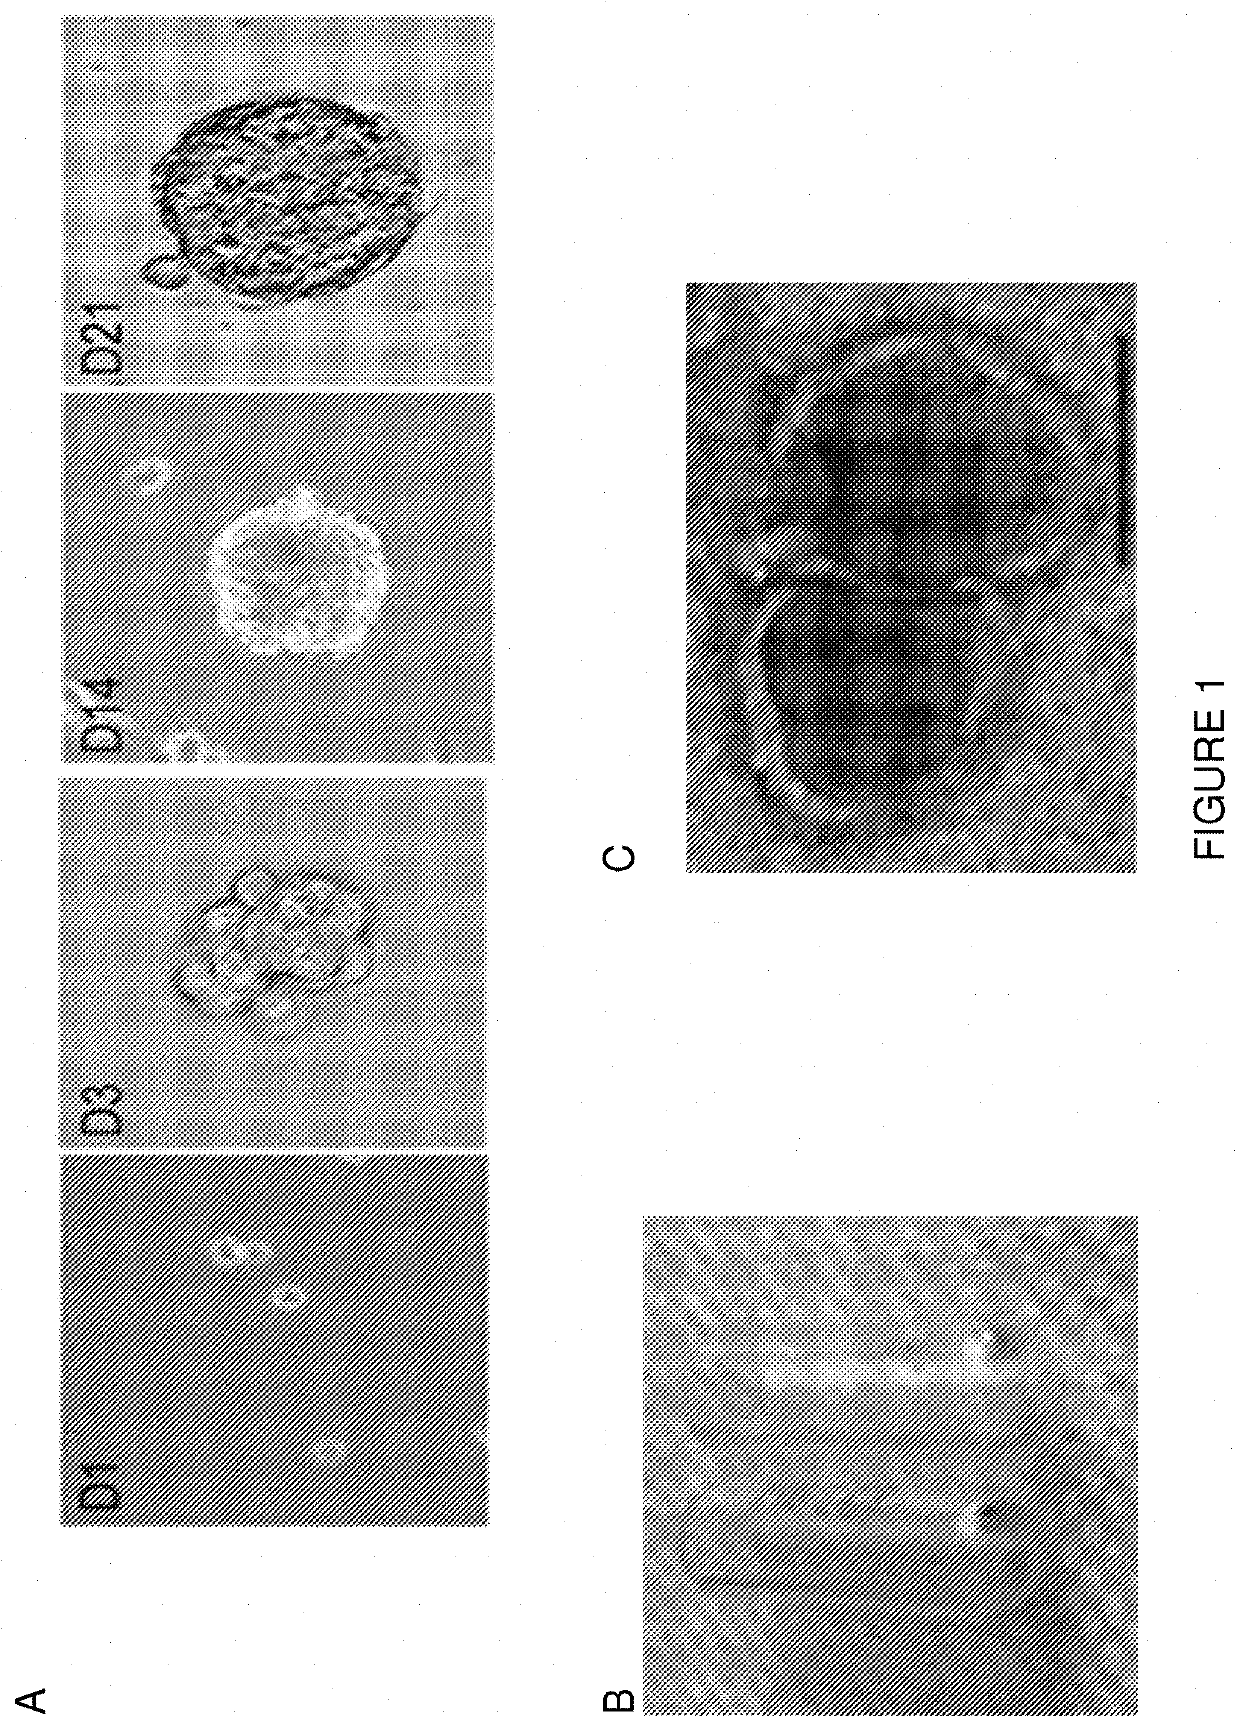 Methods of delivering heparin binding epidermal growth factor using stem cell generated exosomes